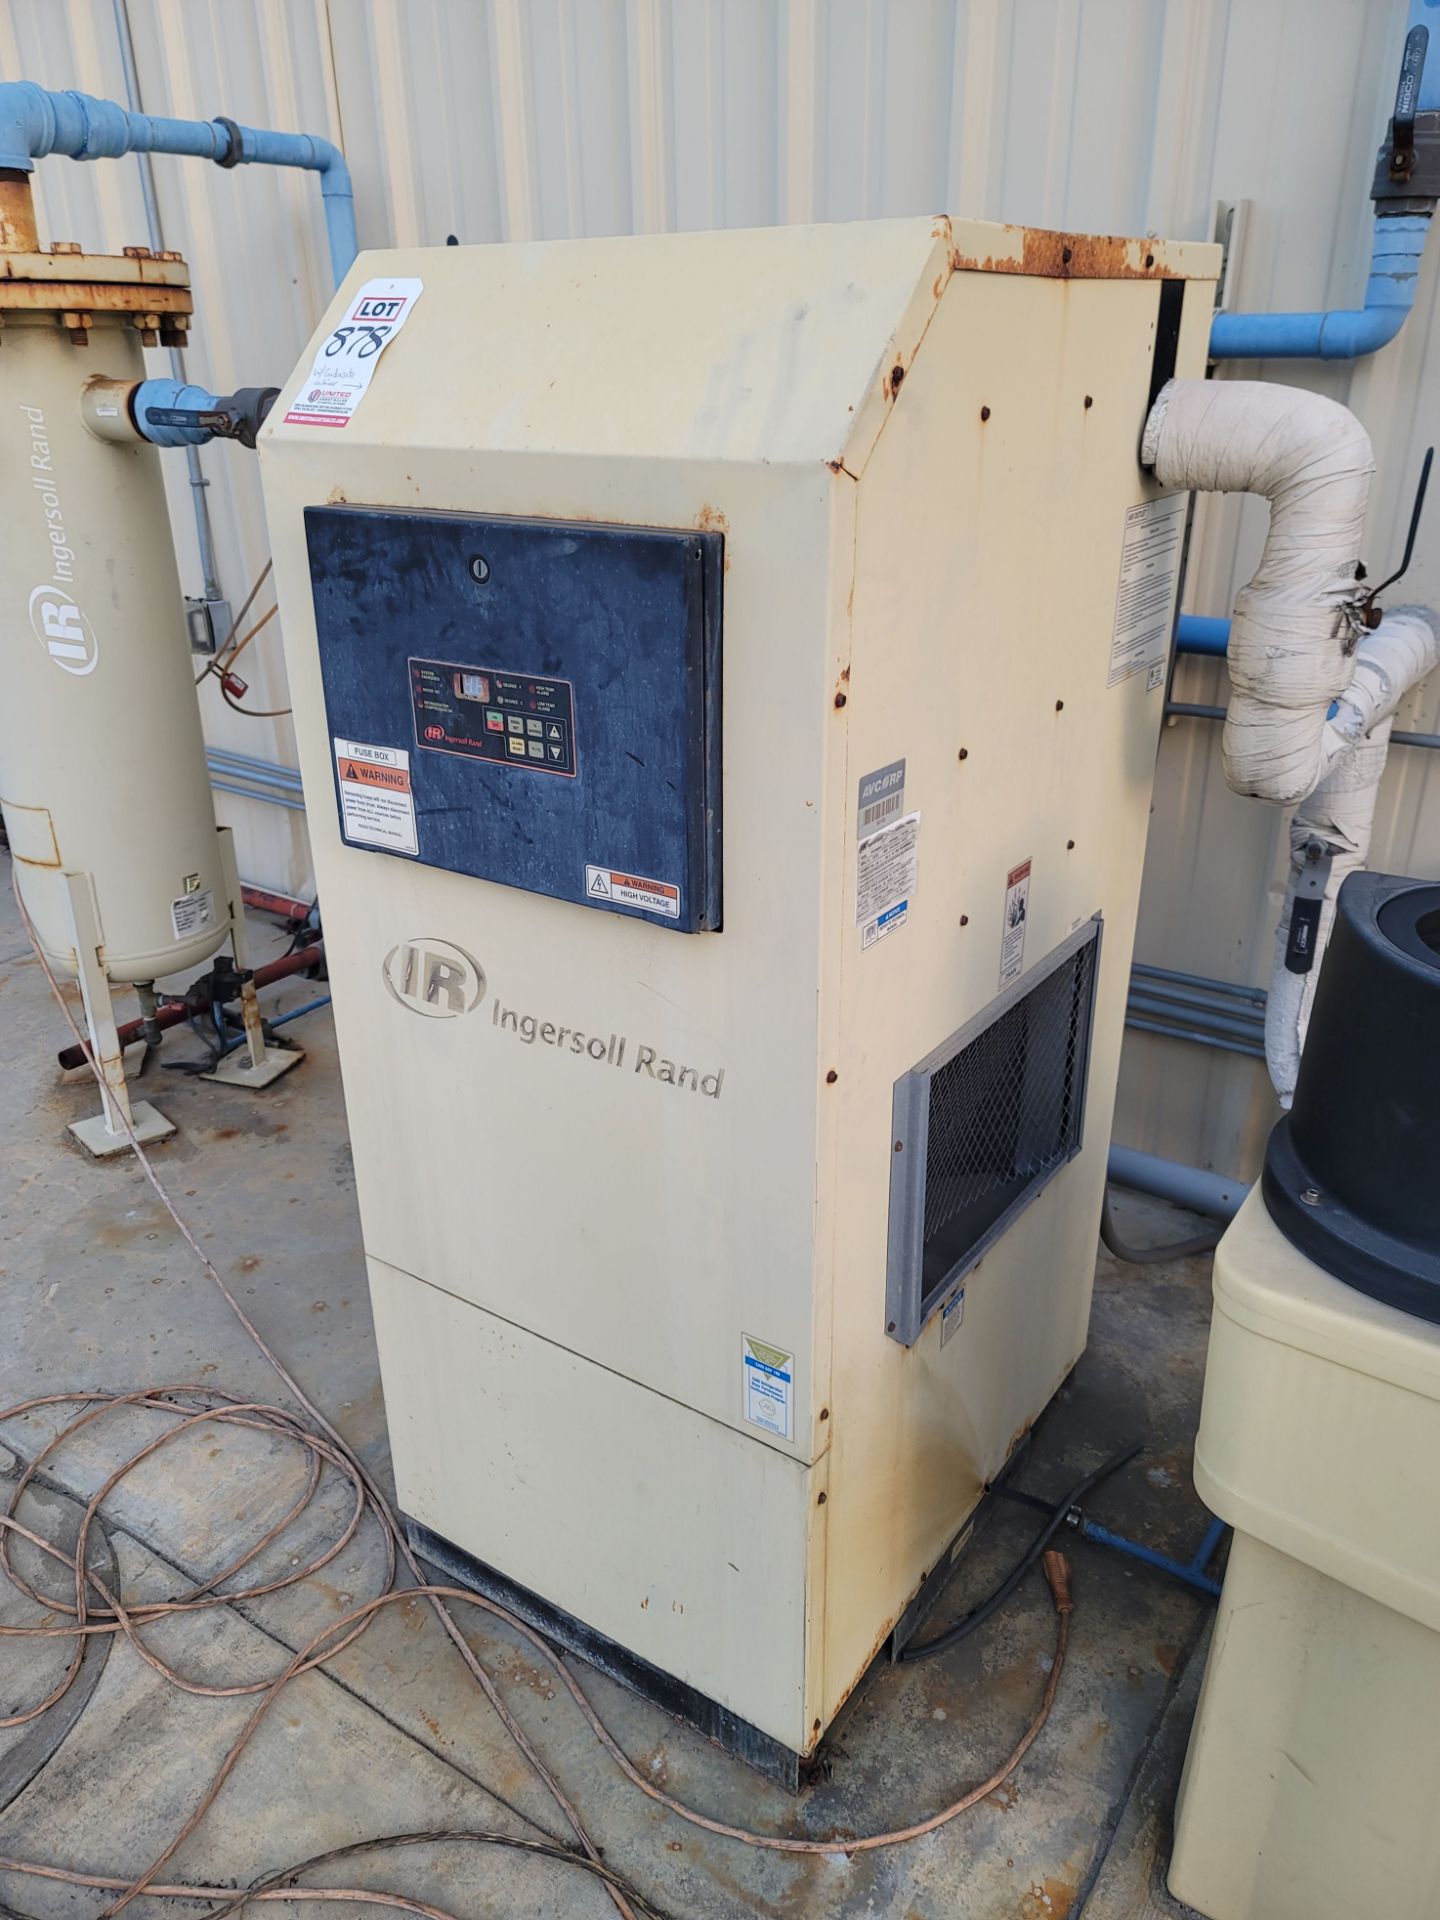 INGERSOLL RAND AIR DRYER, MODEL NVC300A5HN, S/N 347121, W/ CONDENSATE CONTAINER, (OUTSIDE BUILDING - Image 2 of 4